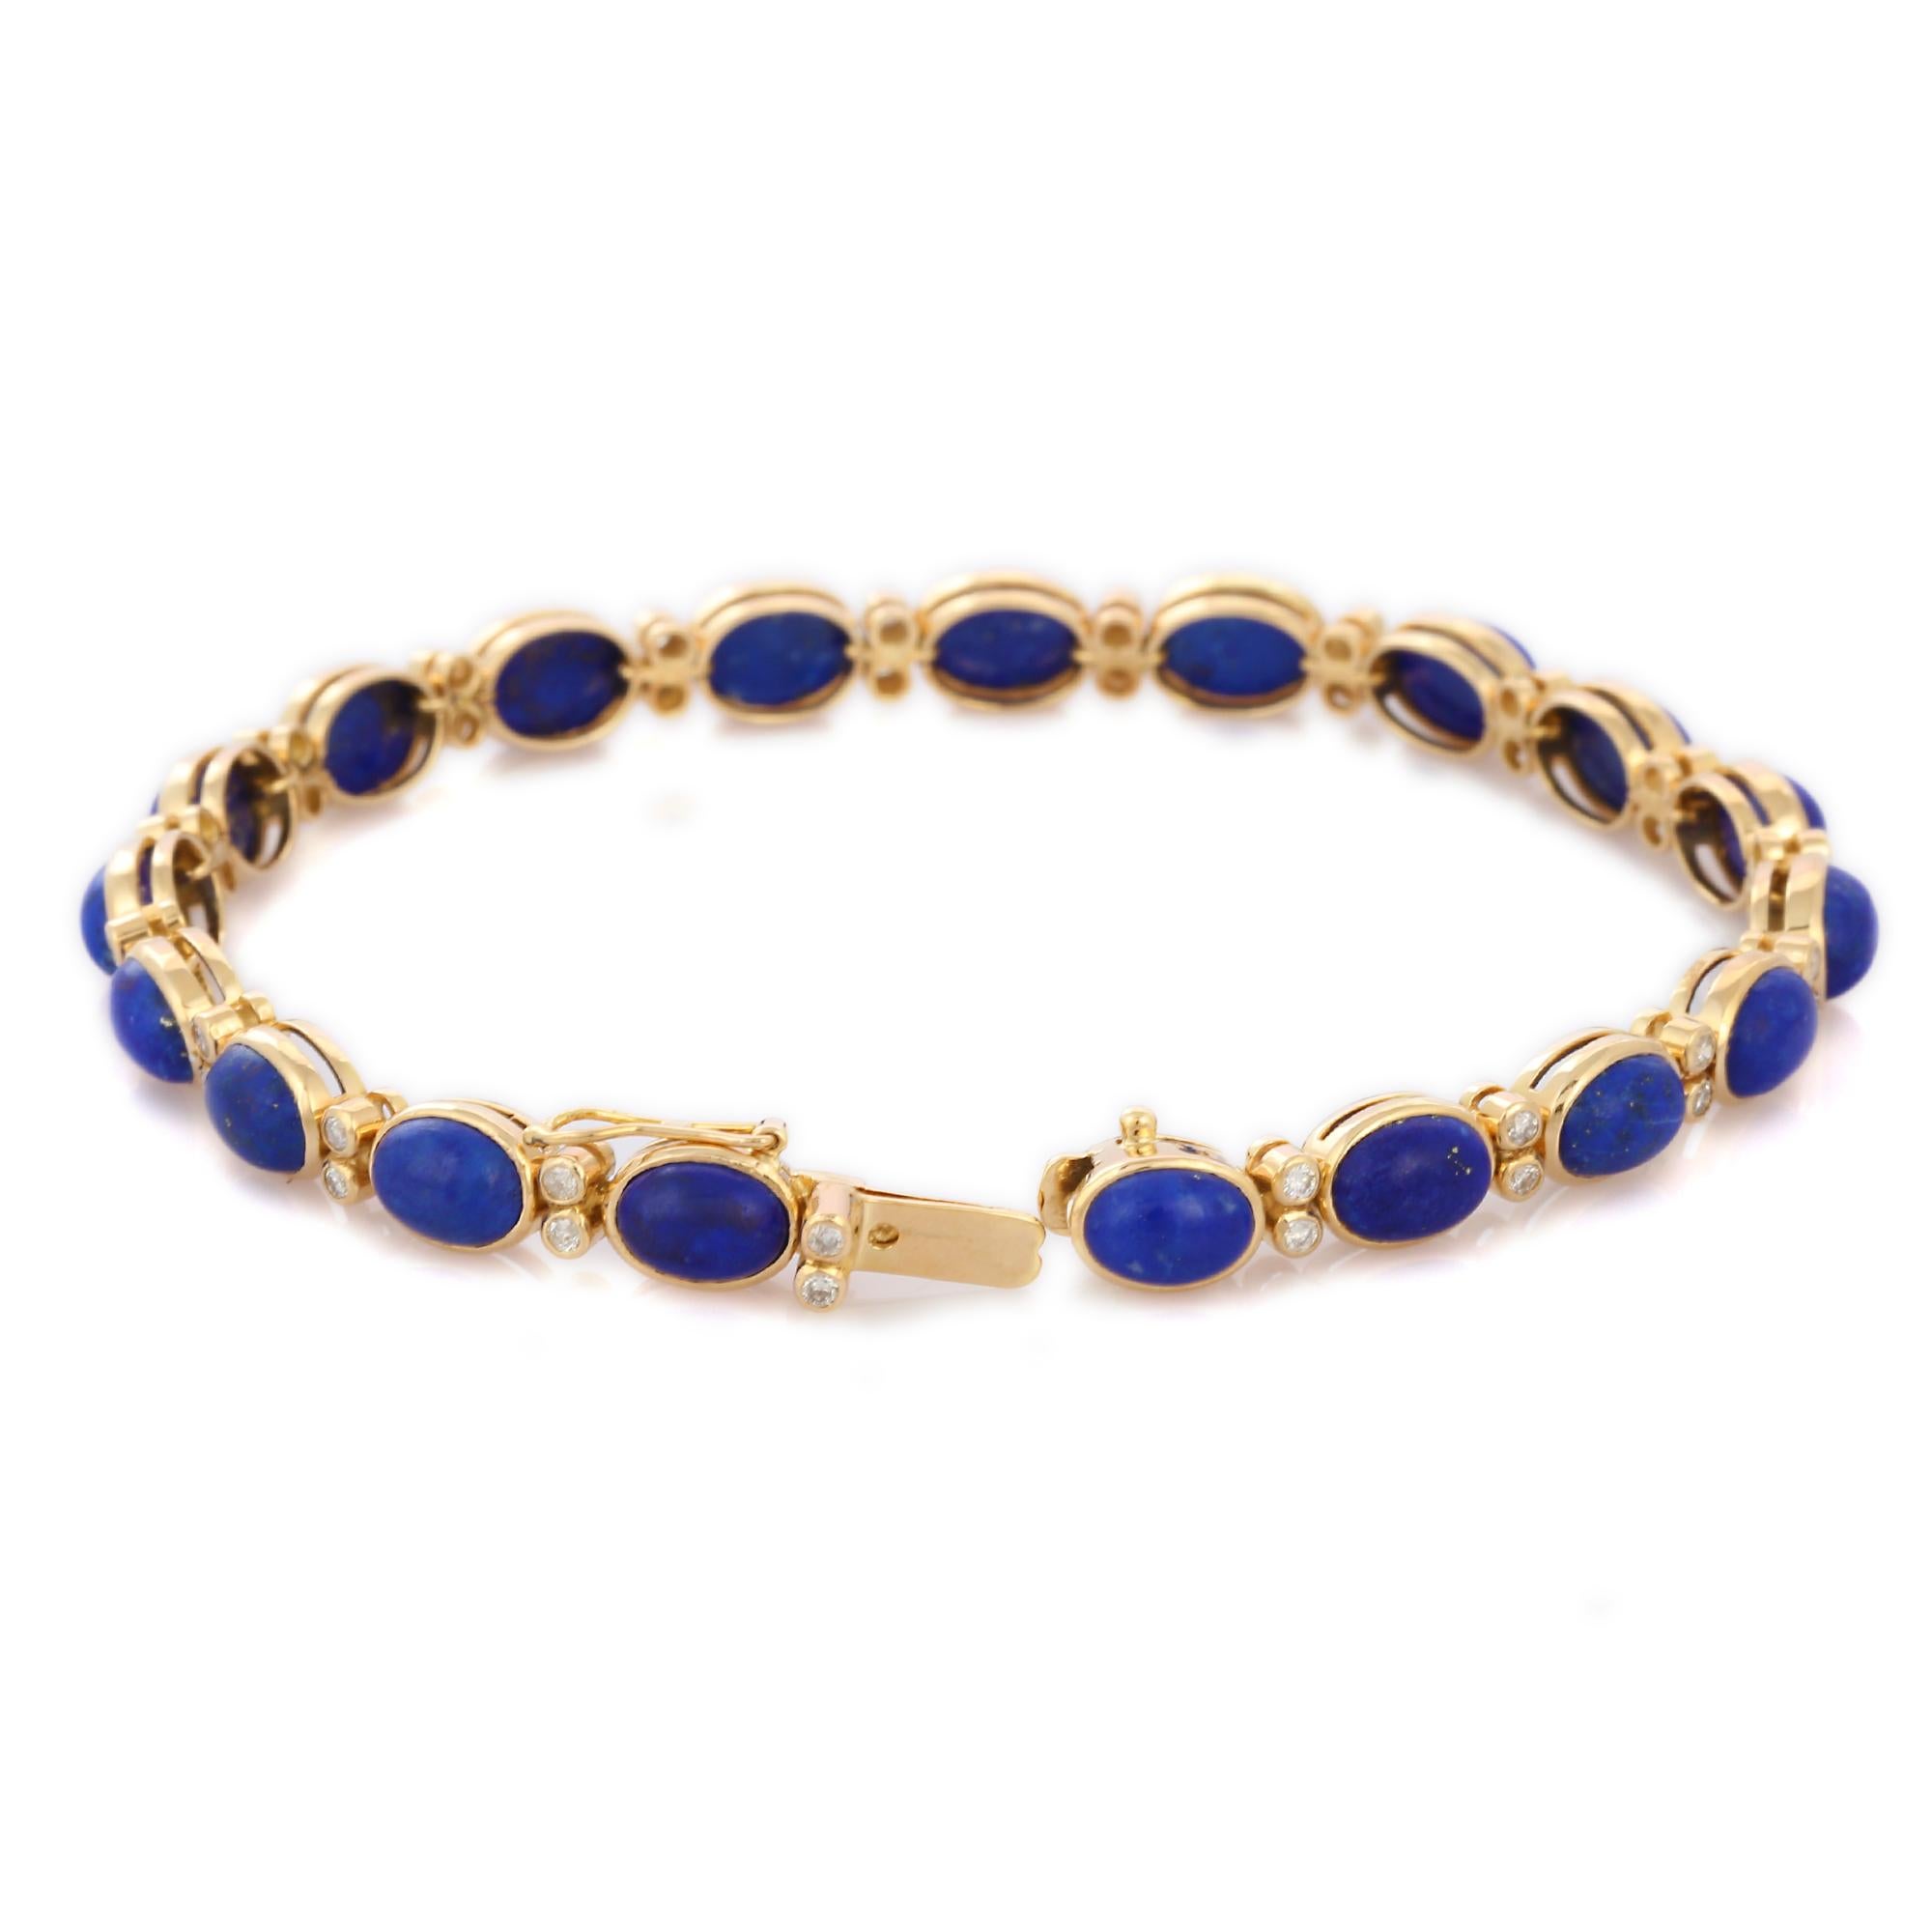 Oval Cut 17.45 Ct Lapis and Diamond Tennis Bracelet in 18K Yellow Gold In New Condition For Sale In Houston, TX